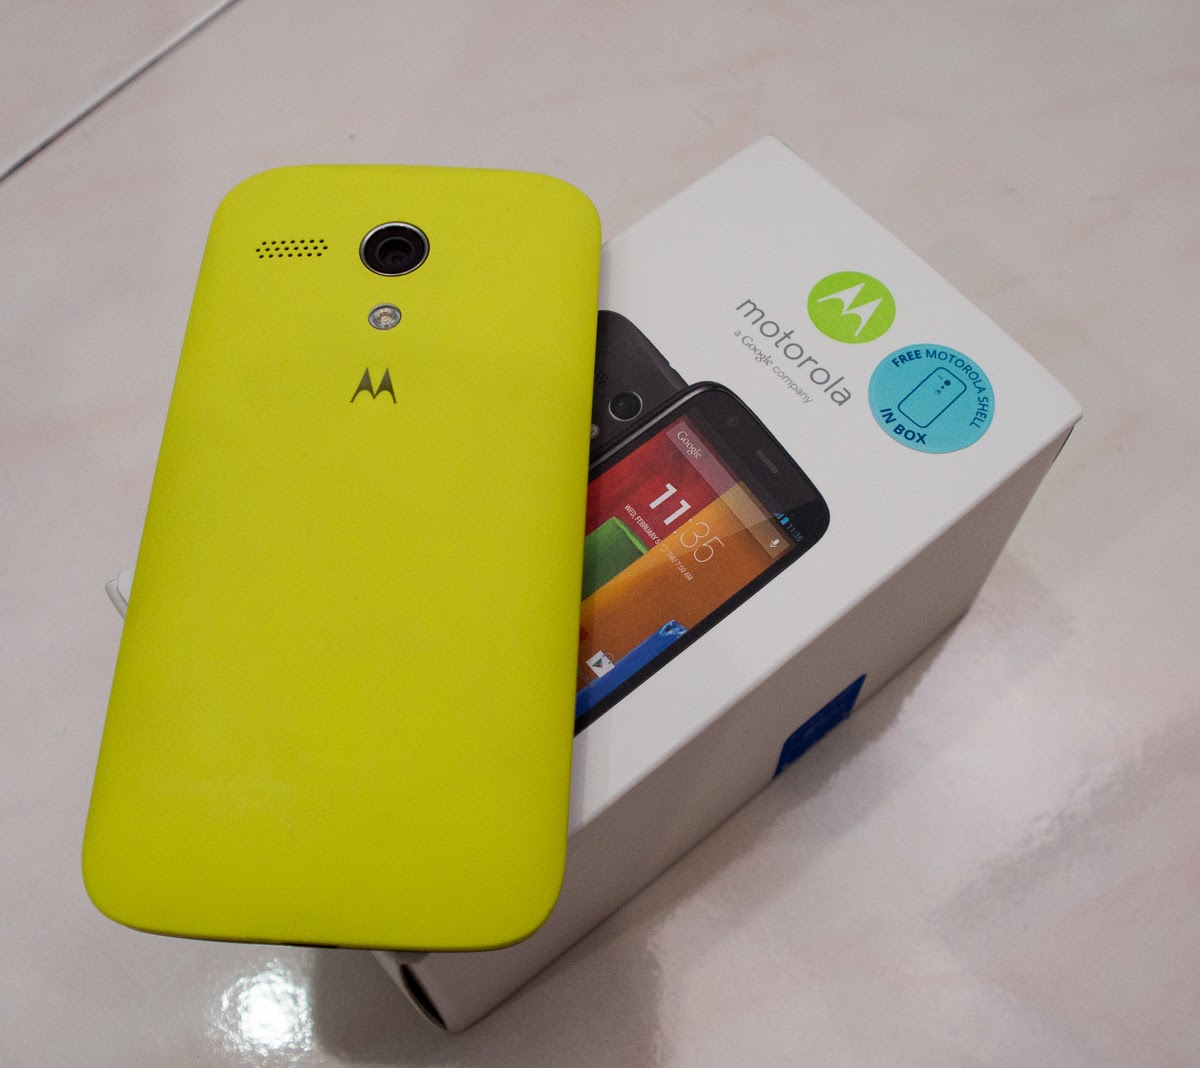 Motorola Moto G4 Play: Unboxing and first impressions